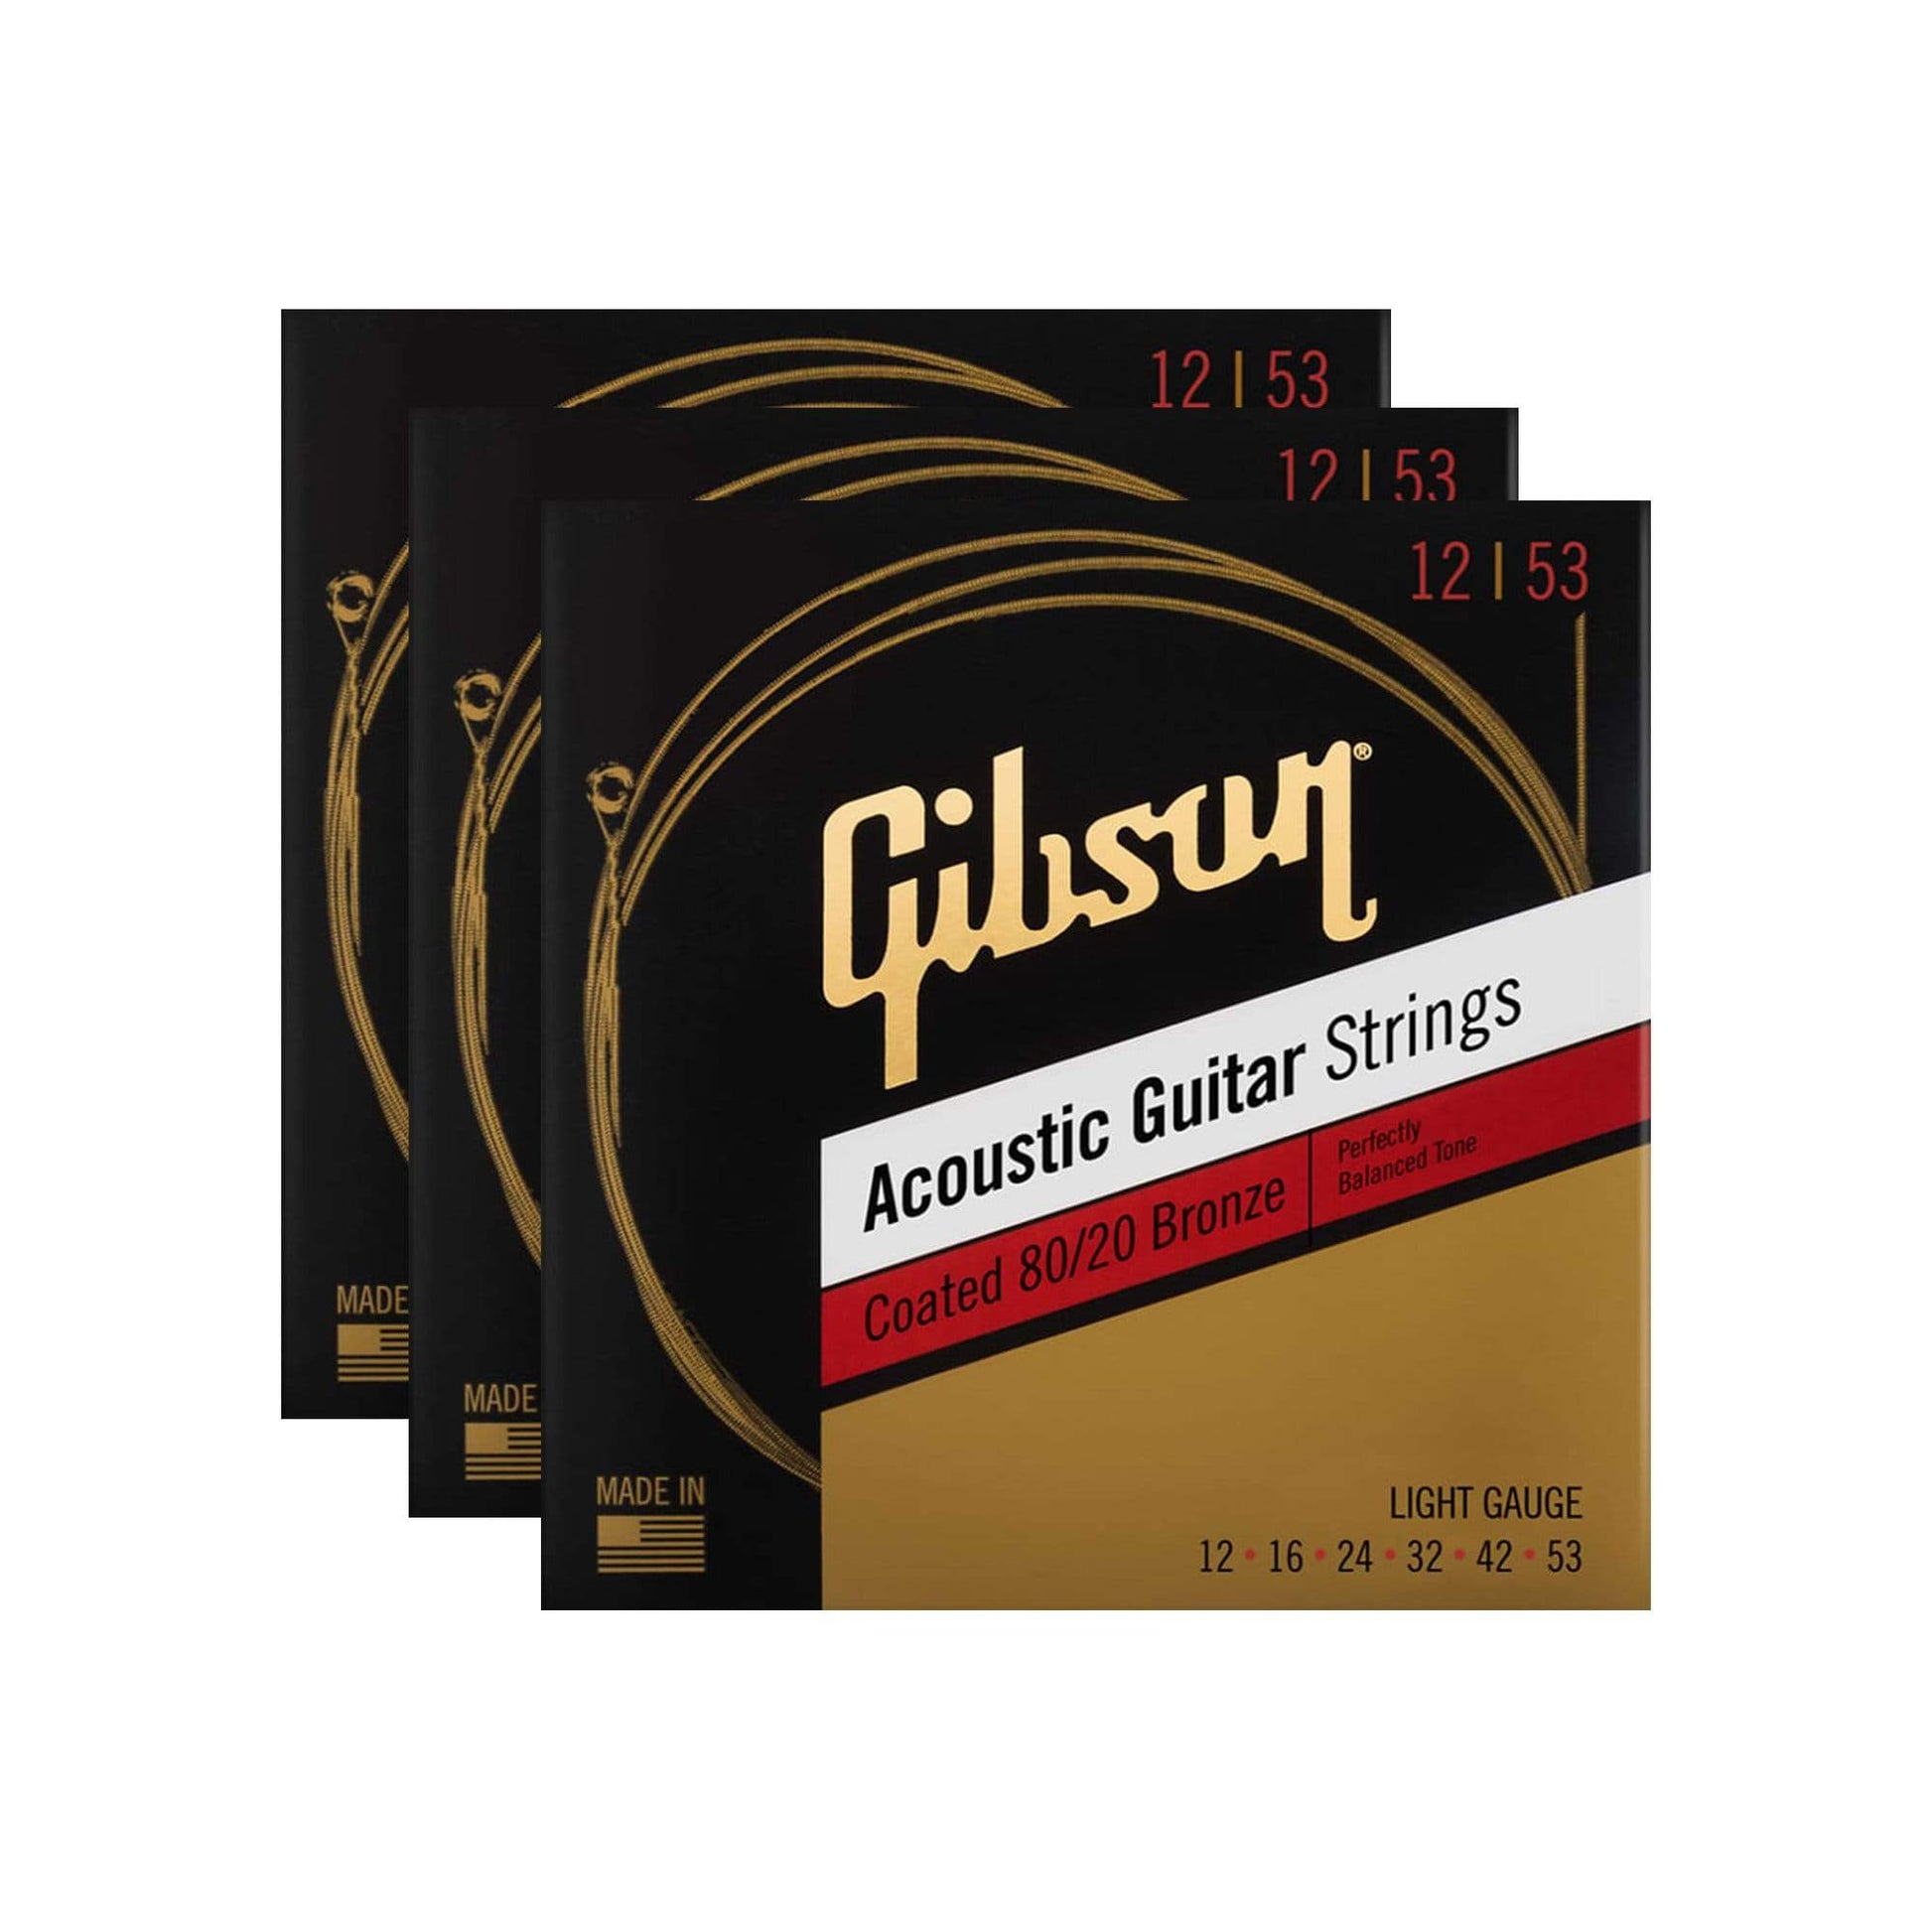 Gibson Coated 80/20 Bronze Acoustic Guitar Strings Light 3 Pack Bundle Accessories / Strings / Guitar Strings